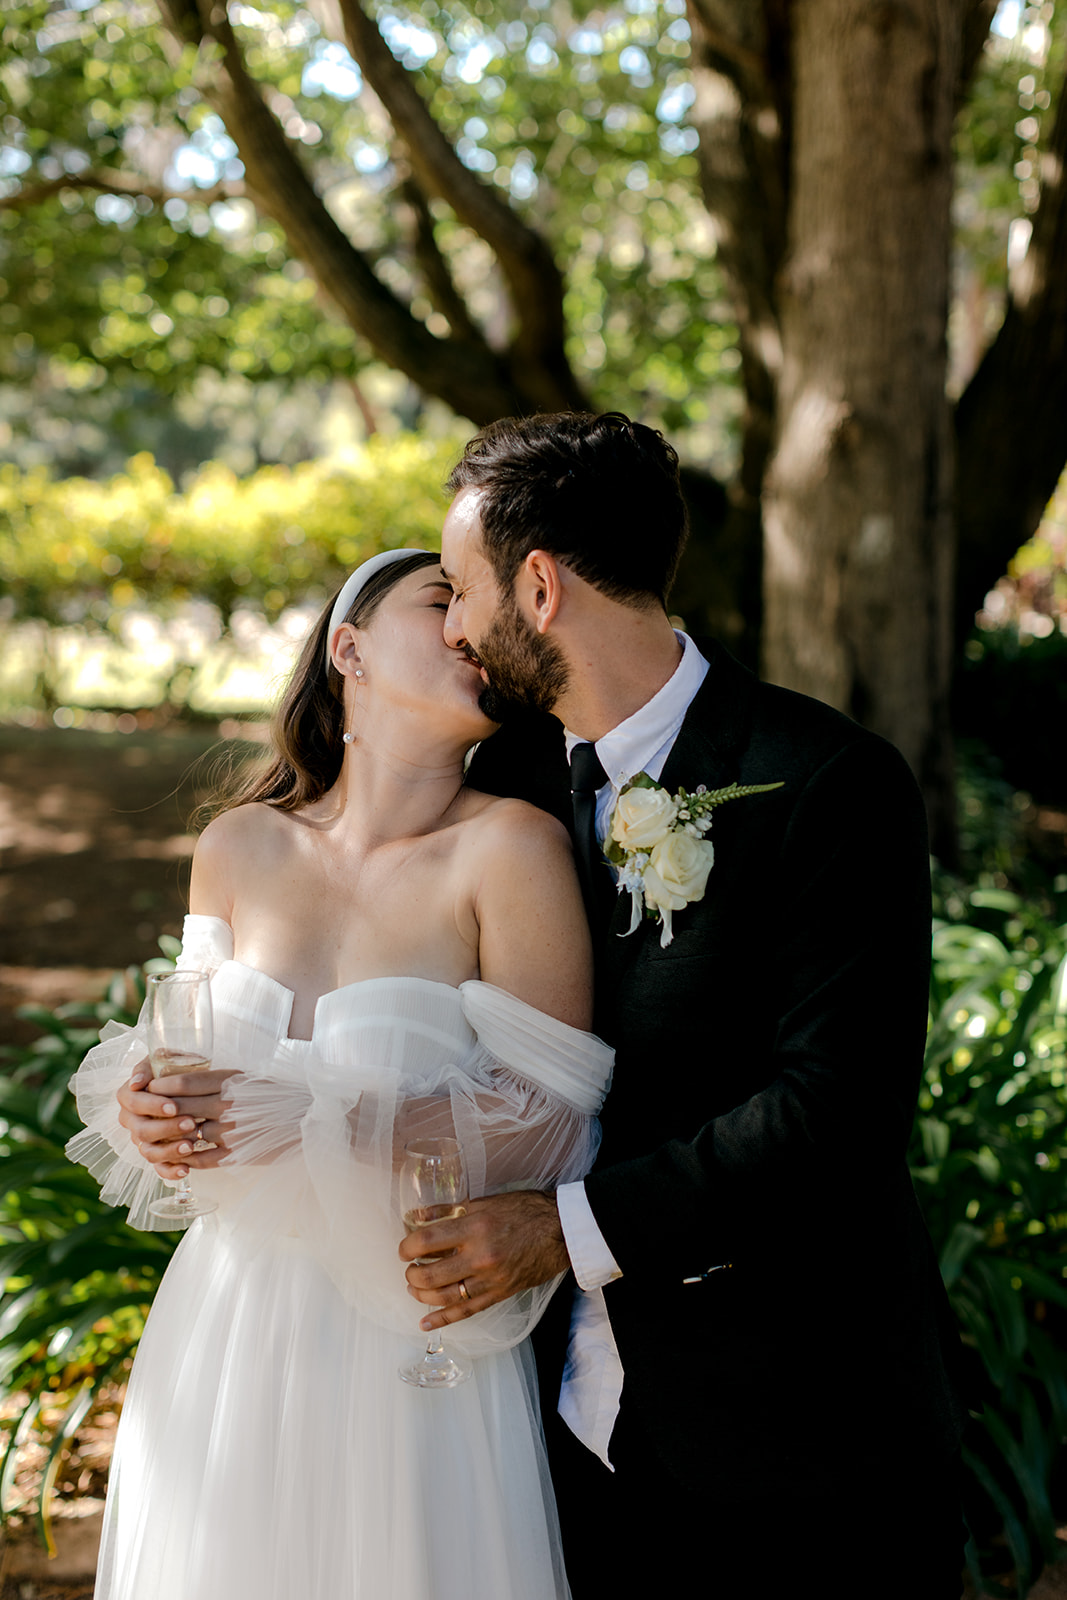 Intimate portrait of bride & groom kissing in an English-inspired garden during their elegant country wedding.